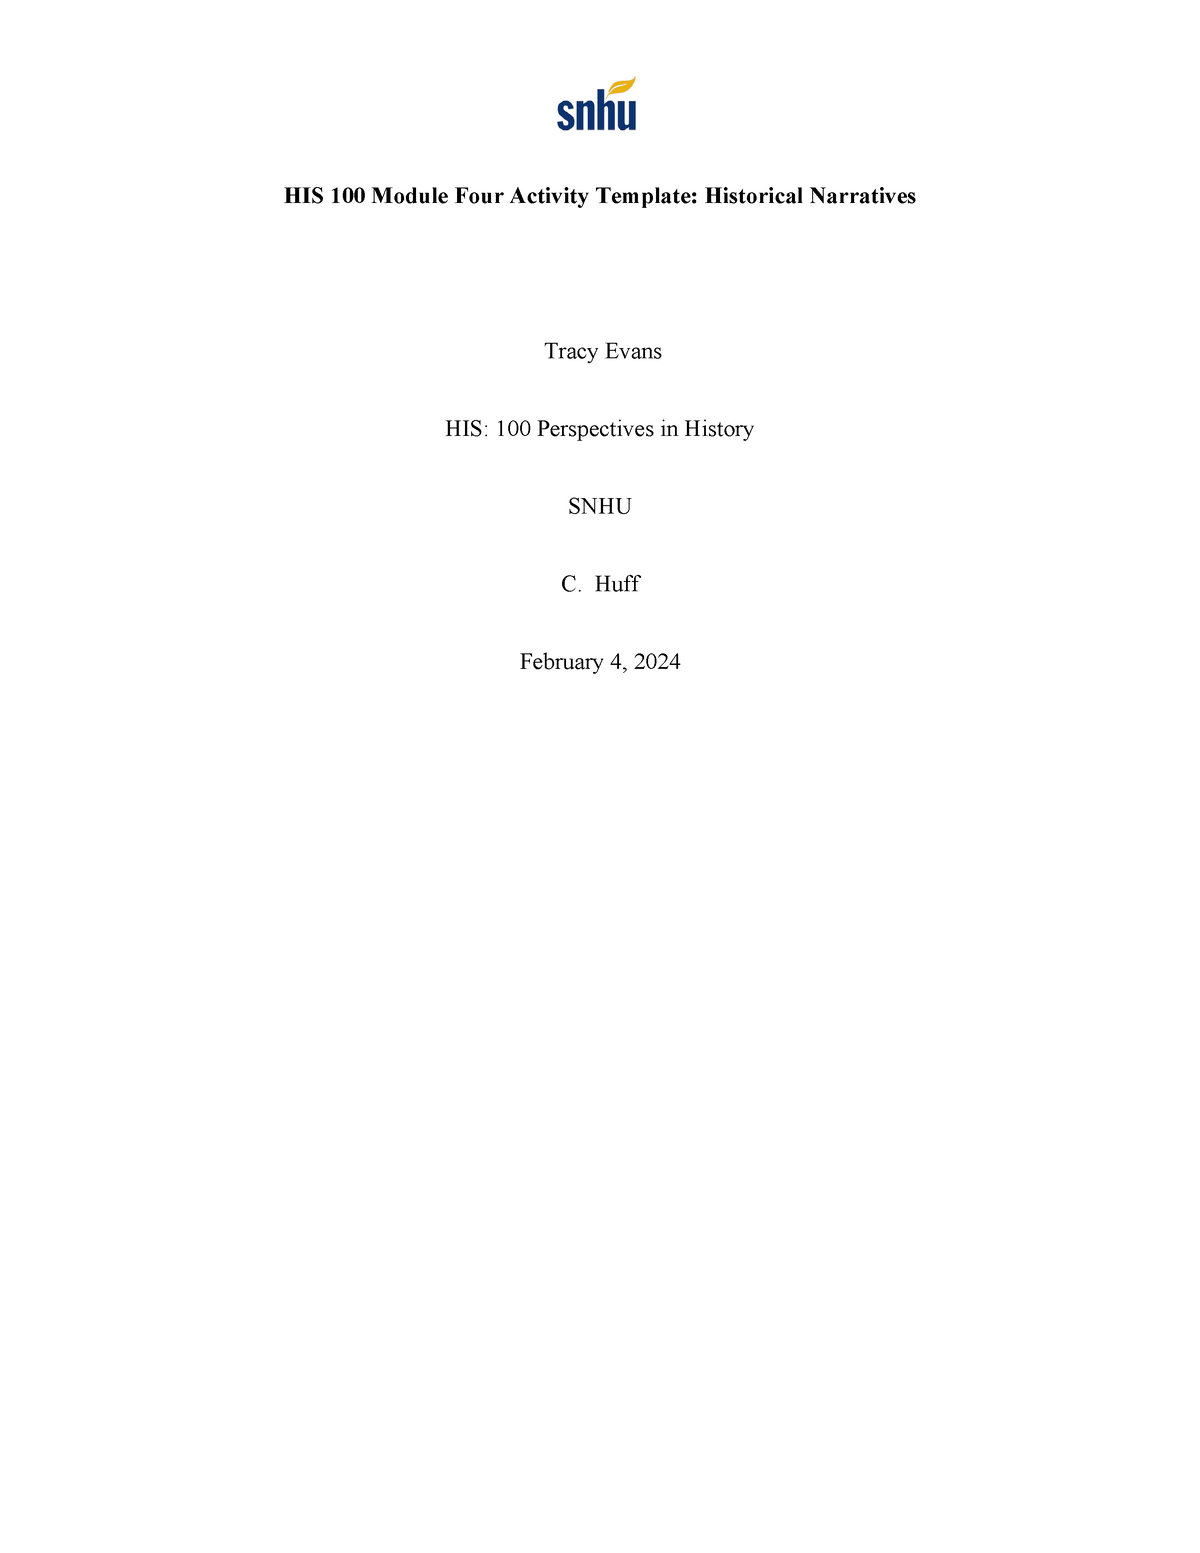 HIS 100 Module Four Activity Narratives Template graded - HIS 100 ...